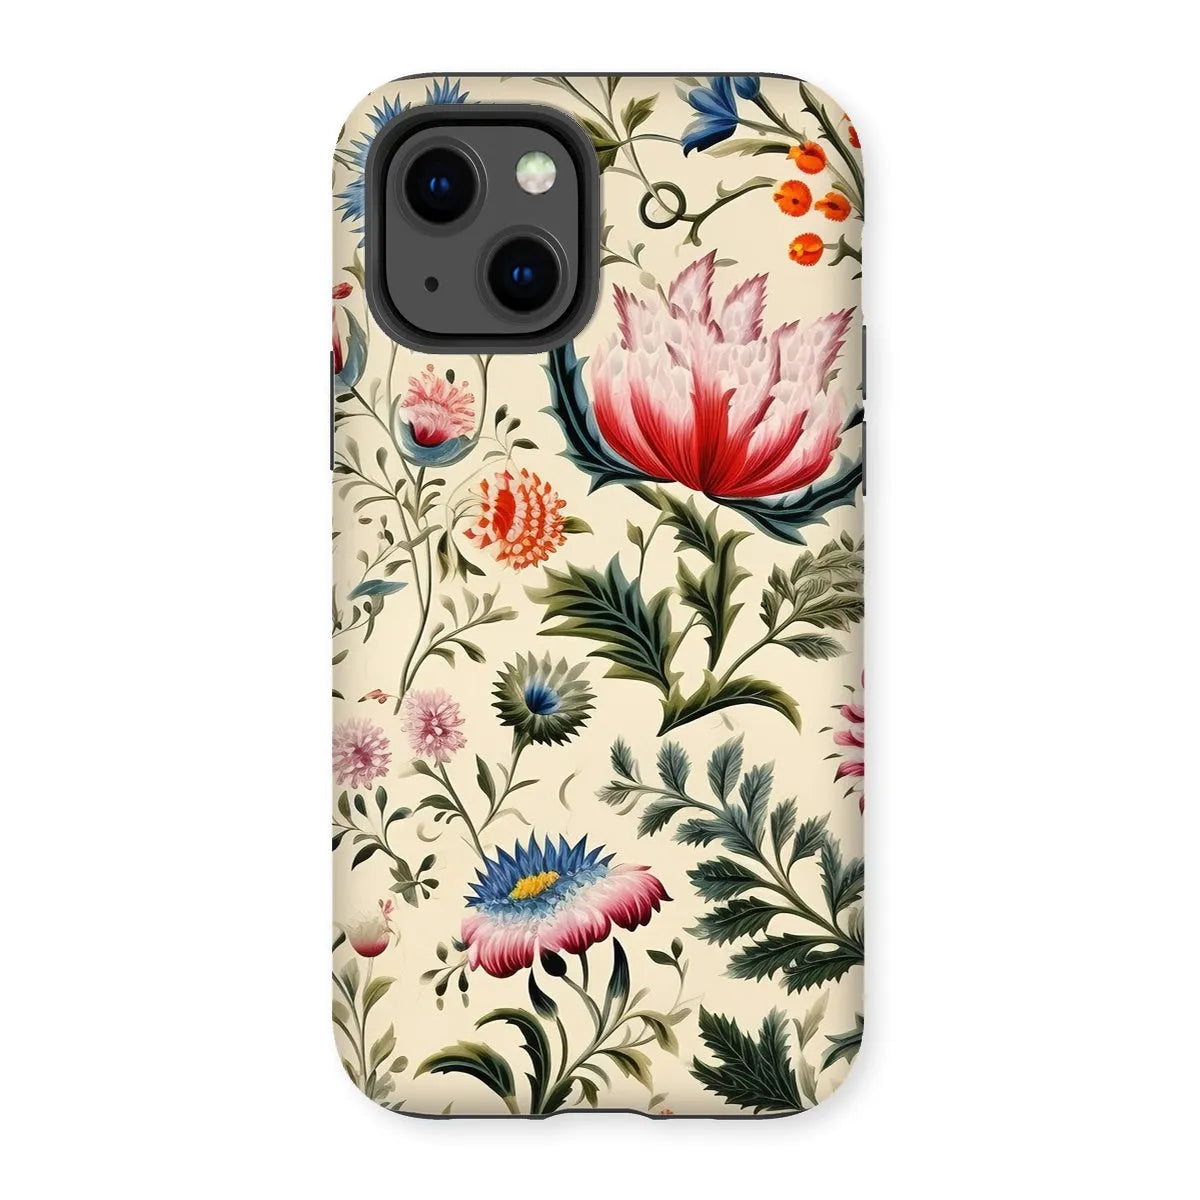 Wildflower Hoopla - Floral Garden Aesthetic Phone Case - Iphone 13 / Matte - Mobile Phone Cases - Aesthetic Art